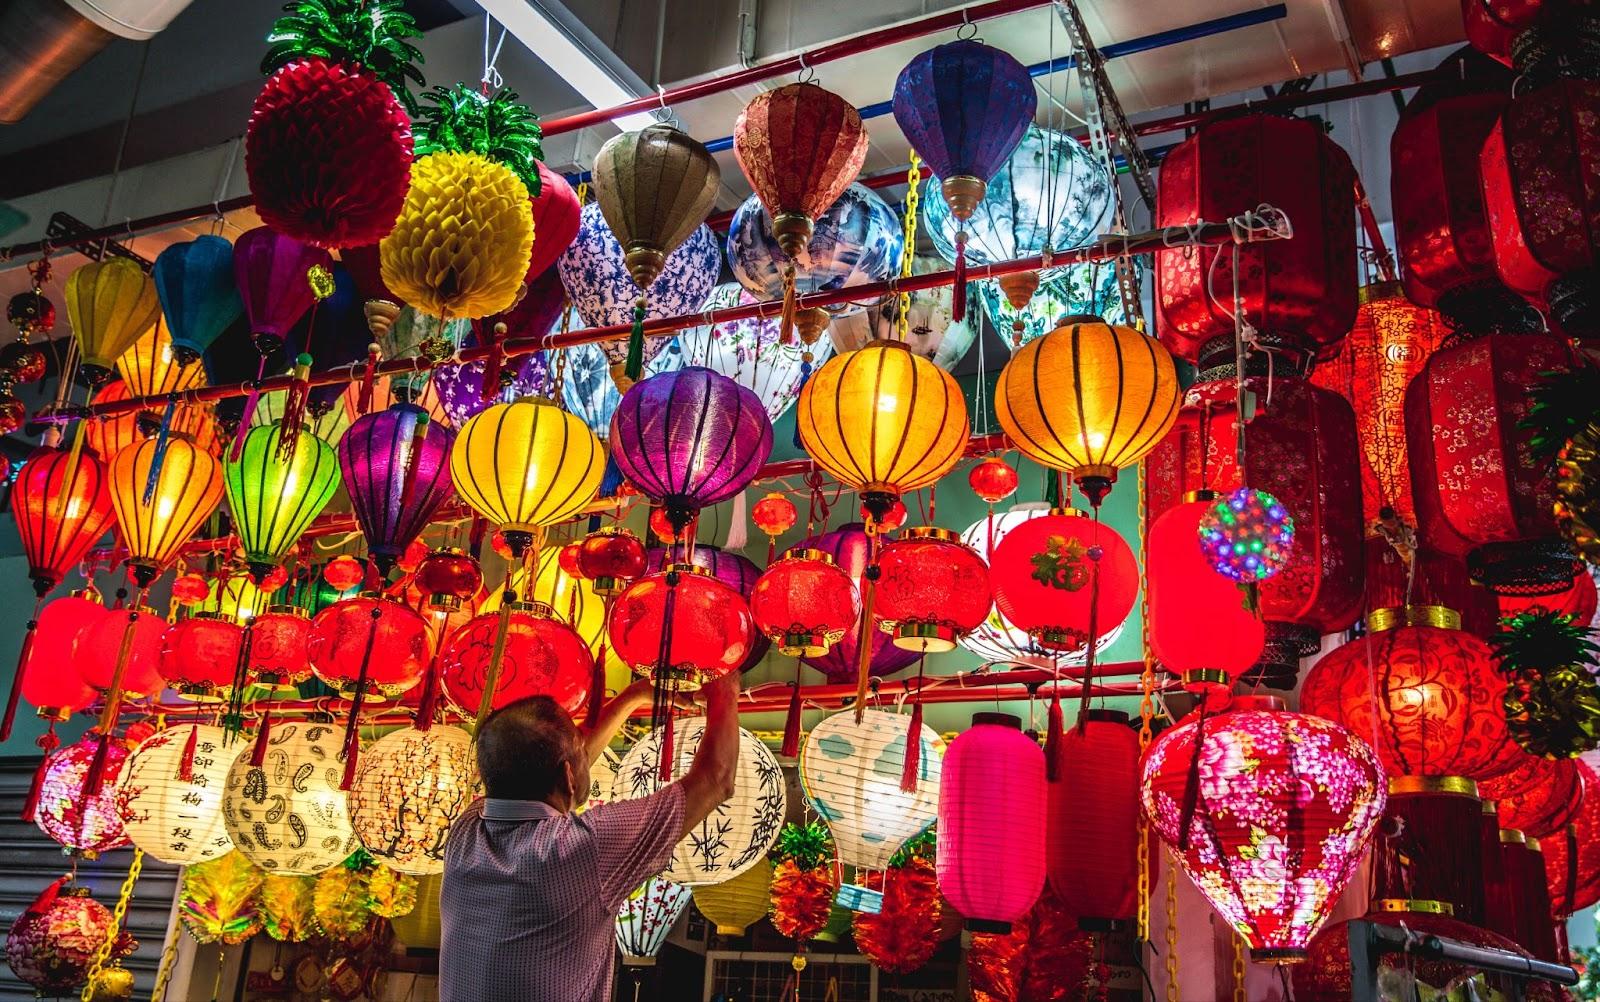 Displays of colorful Chinese New Year Lanterns on Street in Chinatown, Singapore.